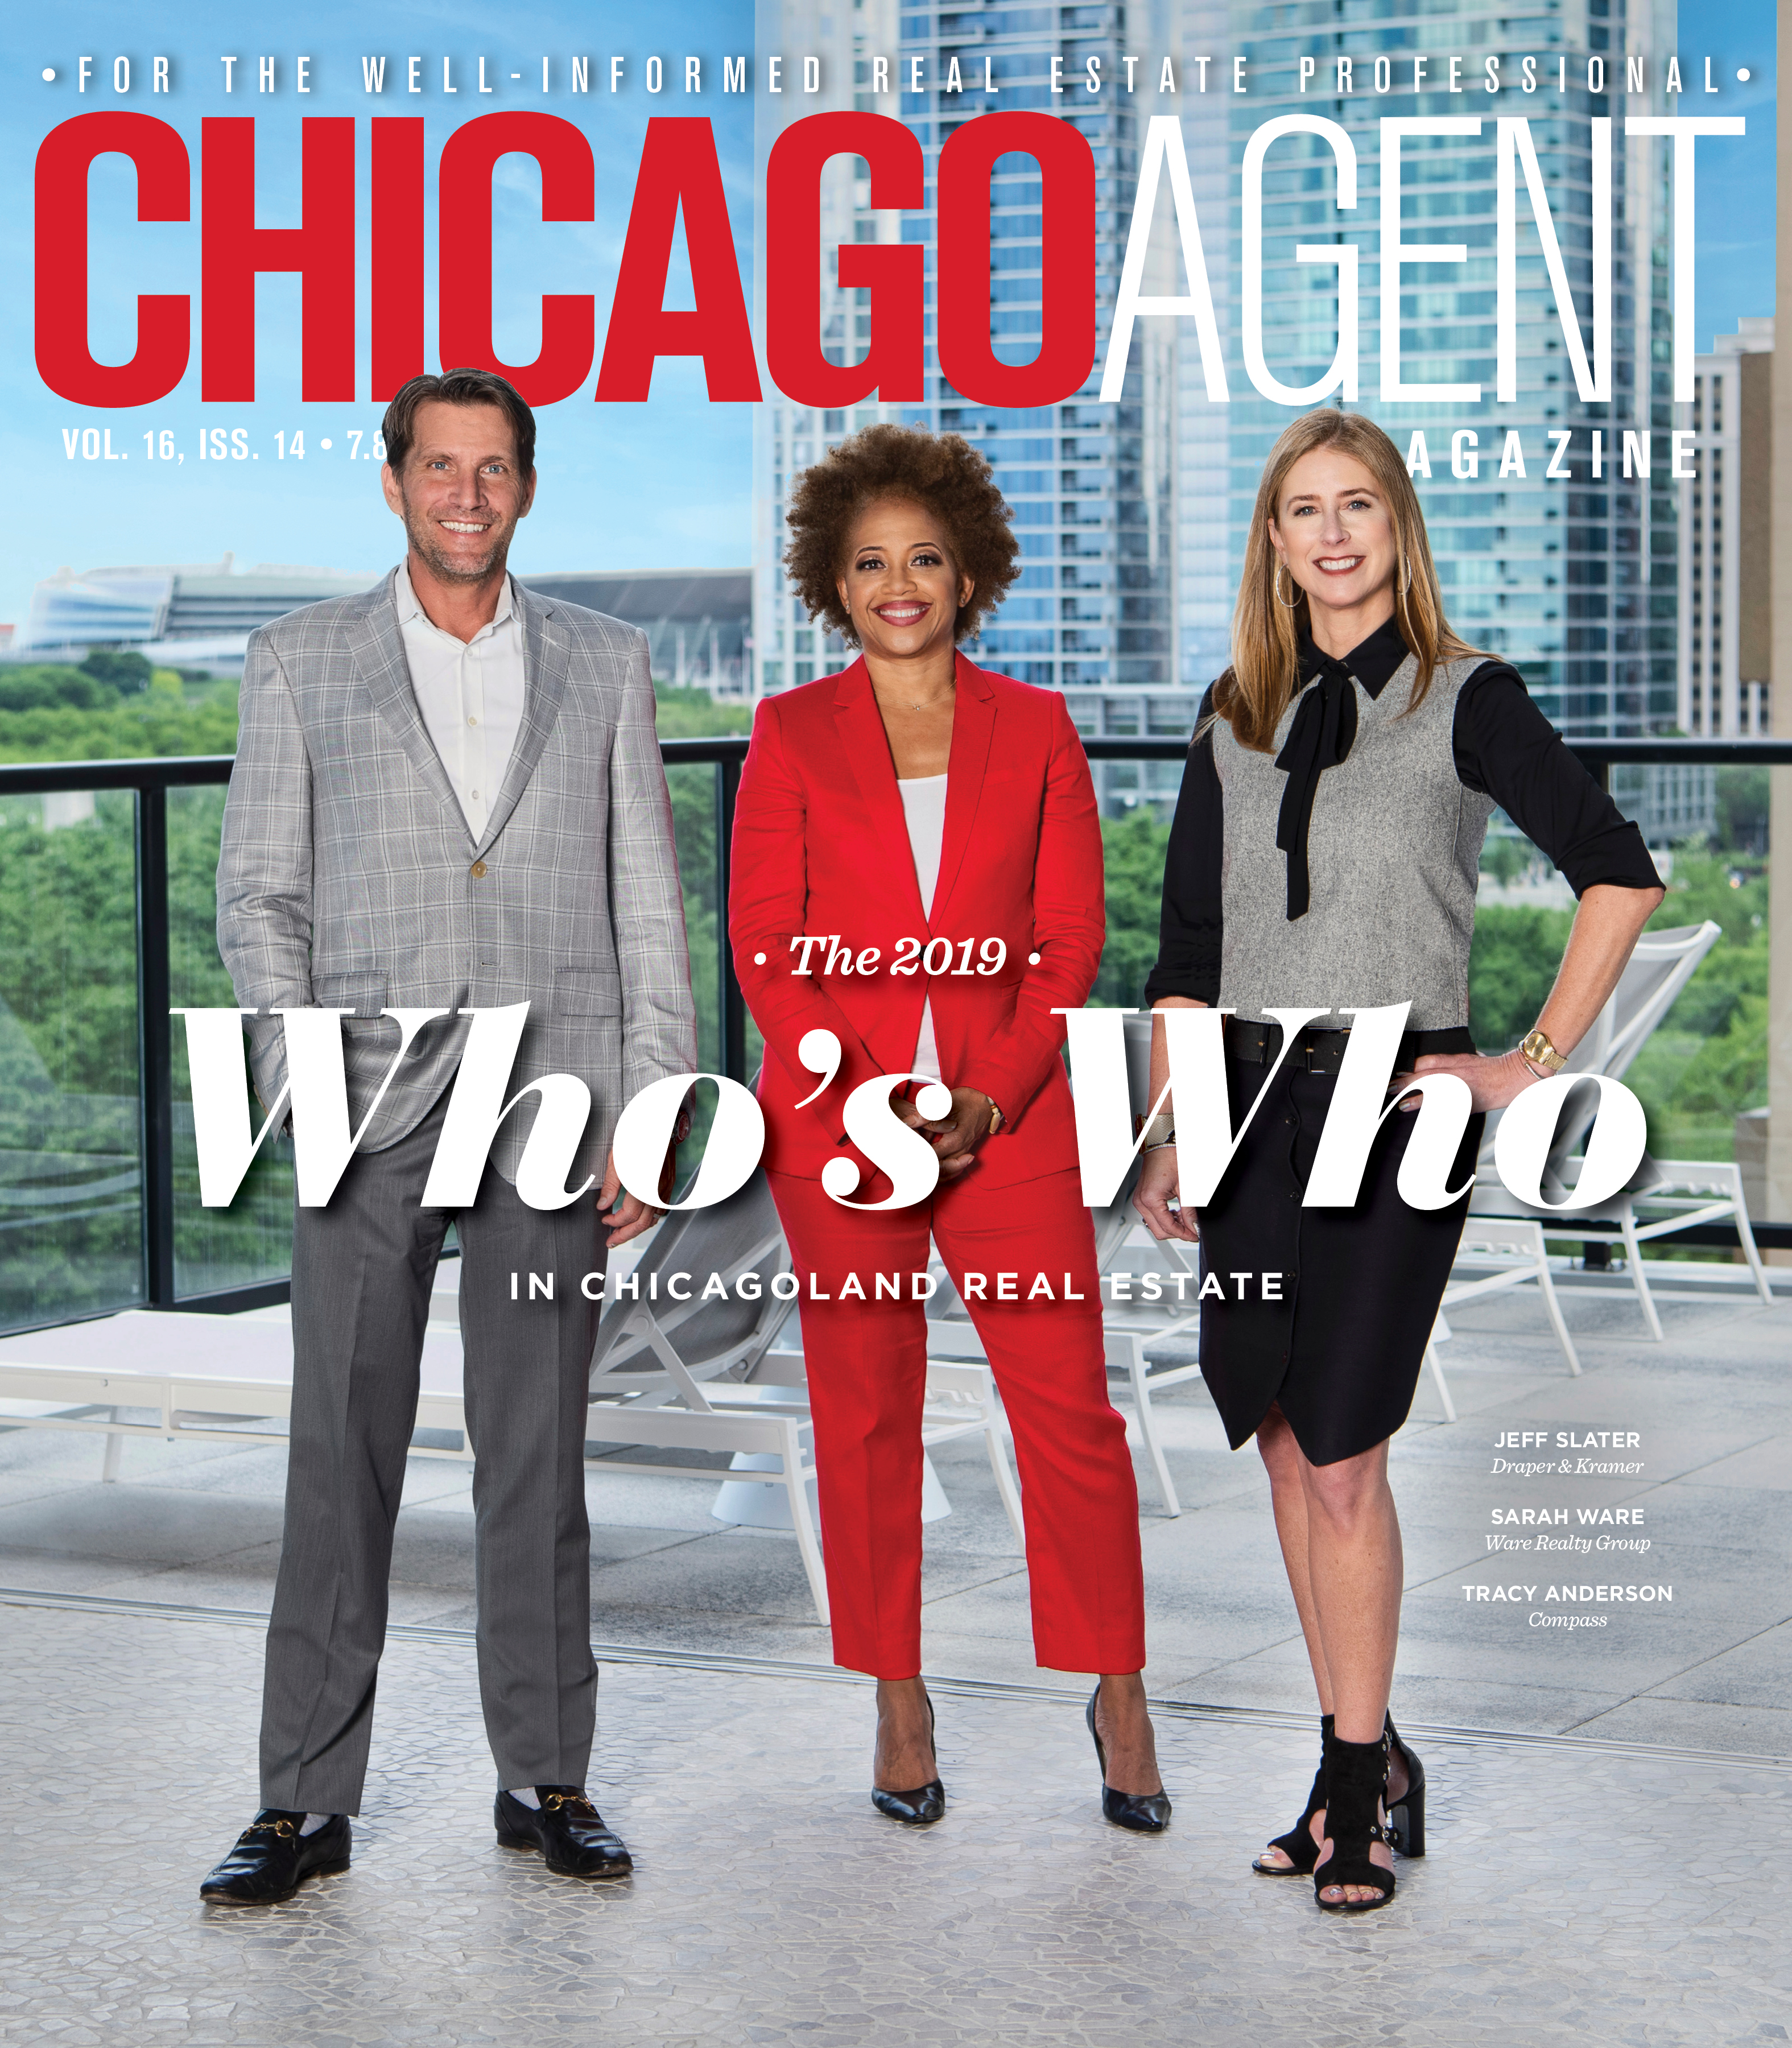 HOT! DuPage County Top 20 Offices – Chicago Agent Magazine WhosWho-Cover-2019